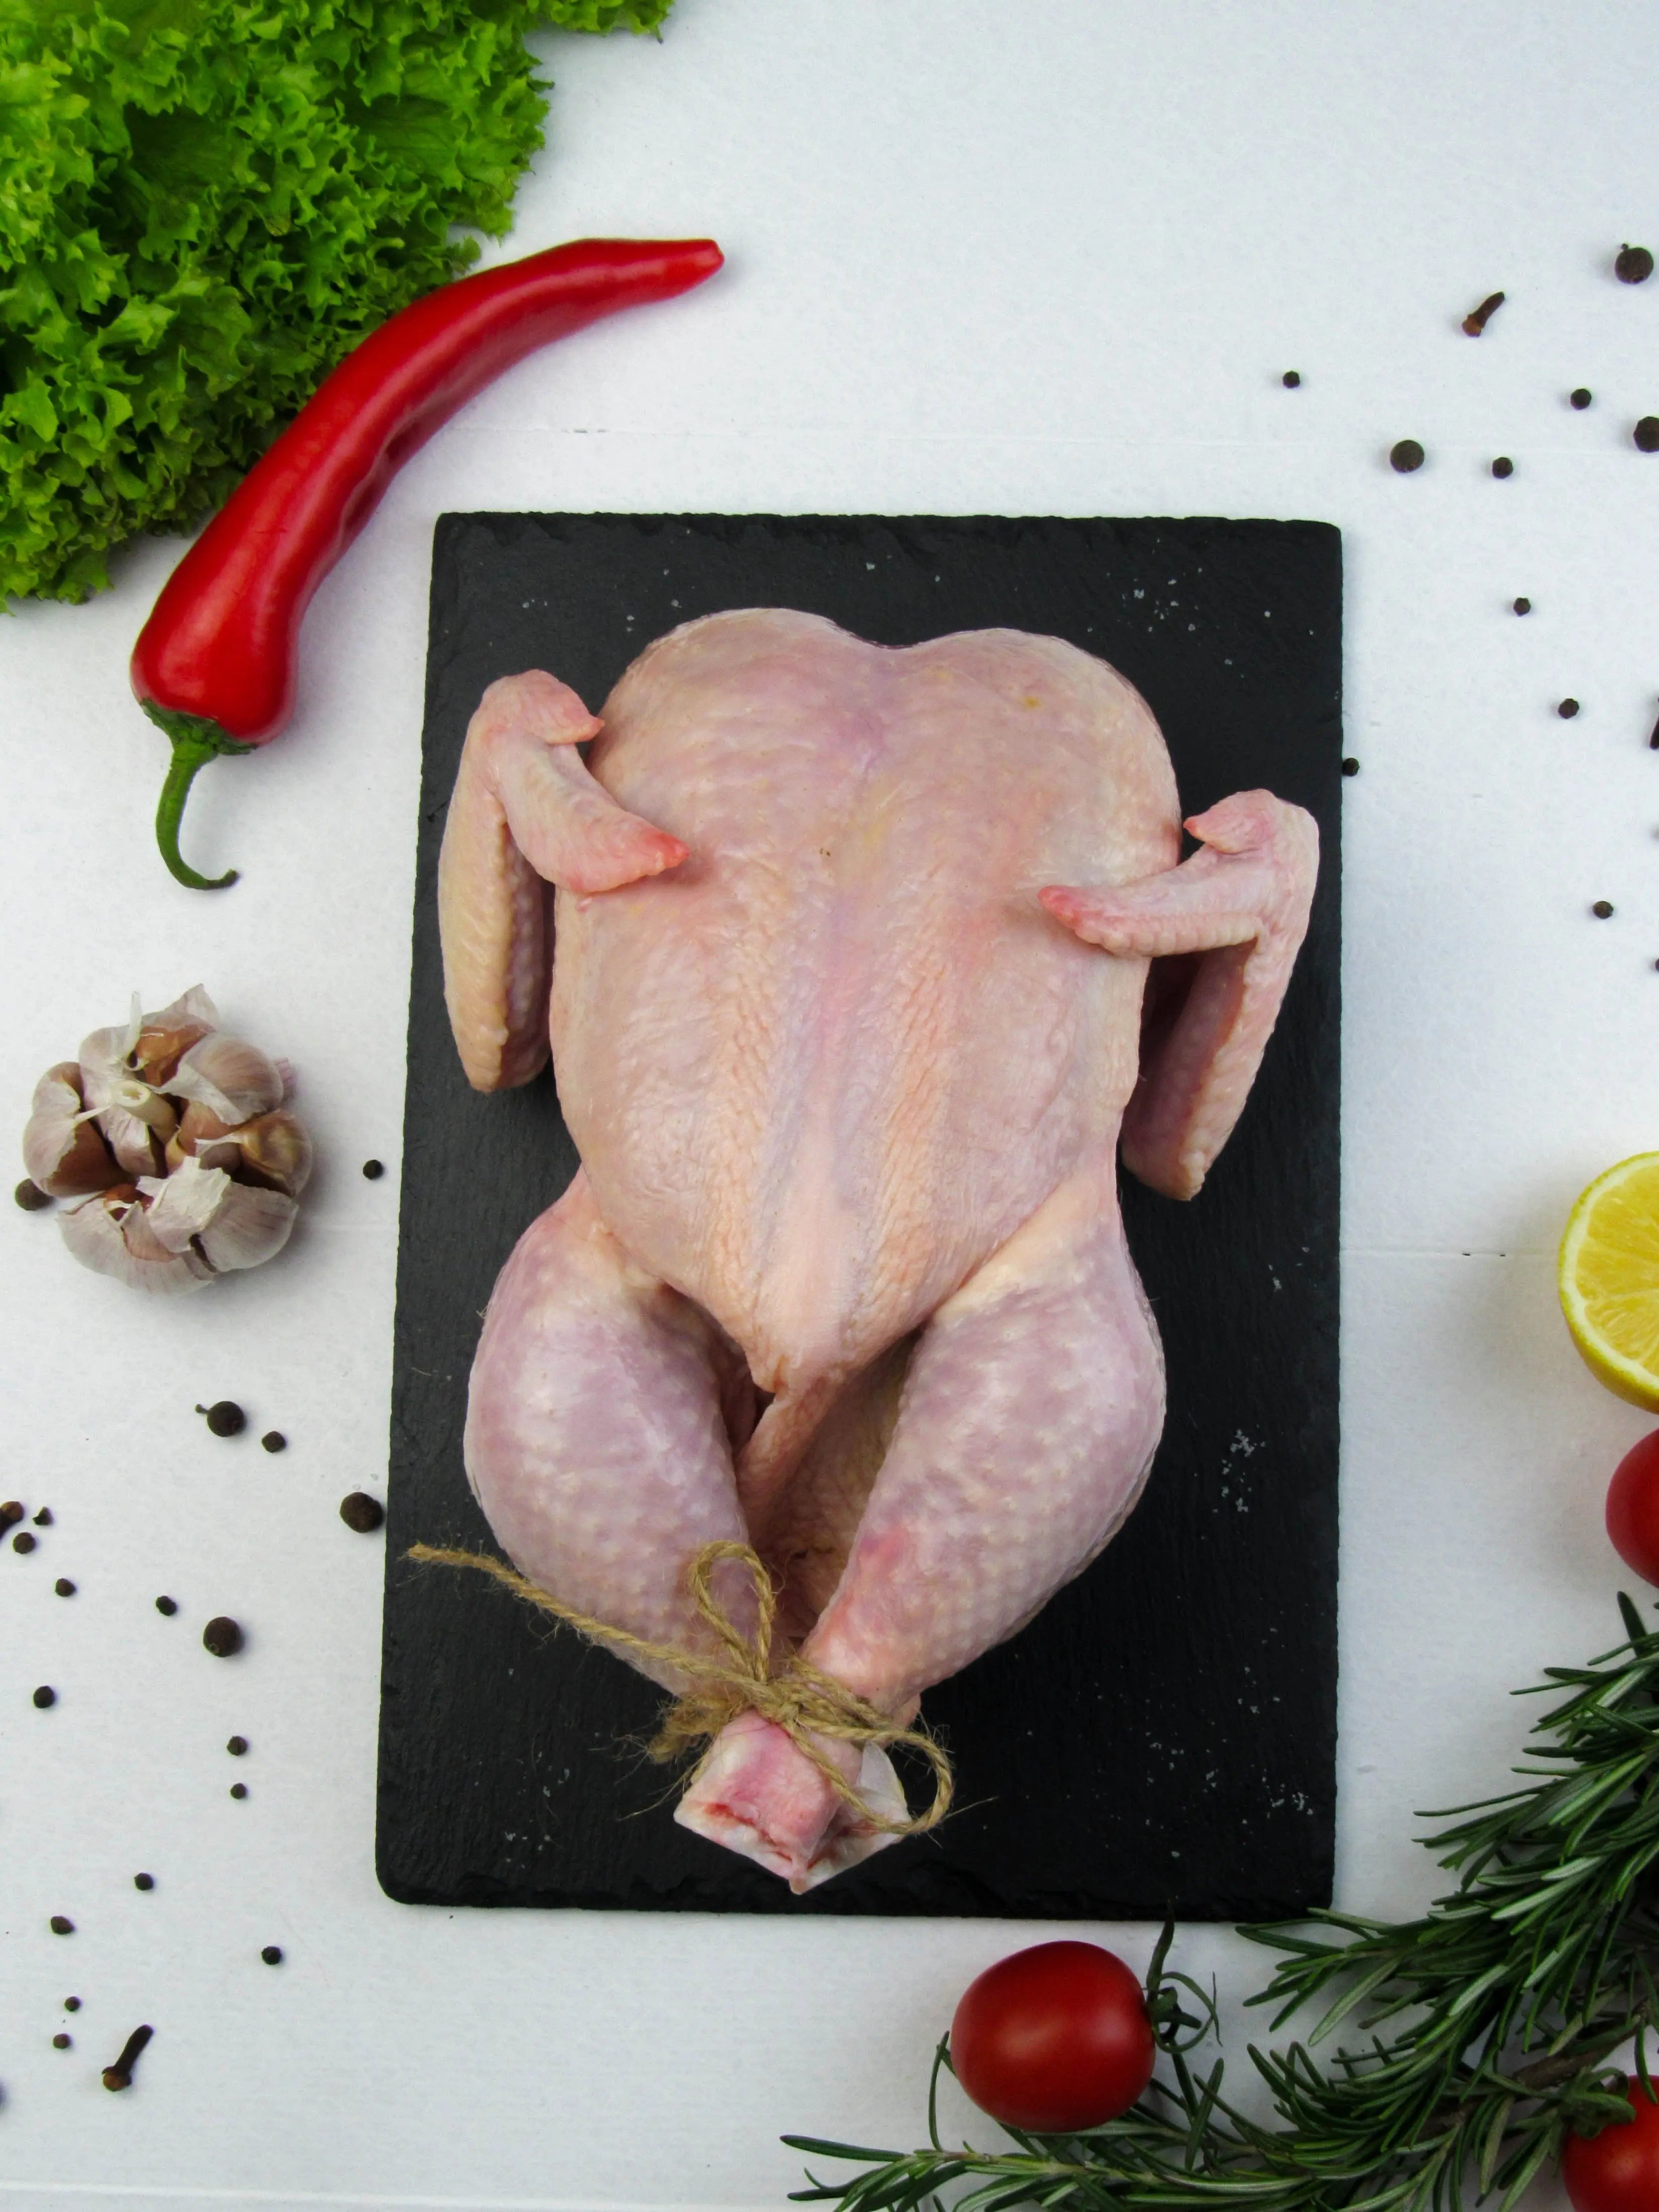 Preserving Poultry: Maximizing the Shelf Life of Thawed Chicken in Your Fridge - Fridge.com